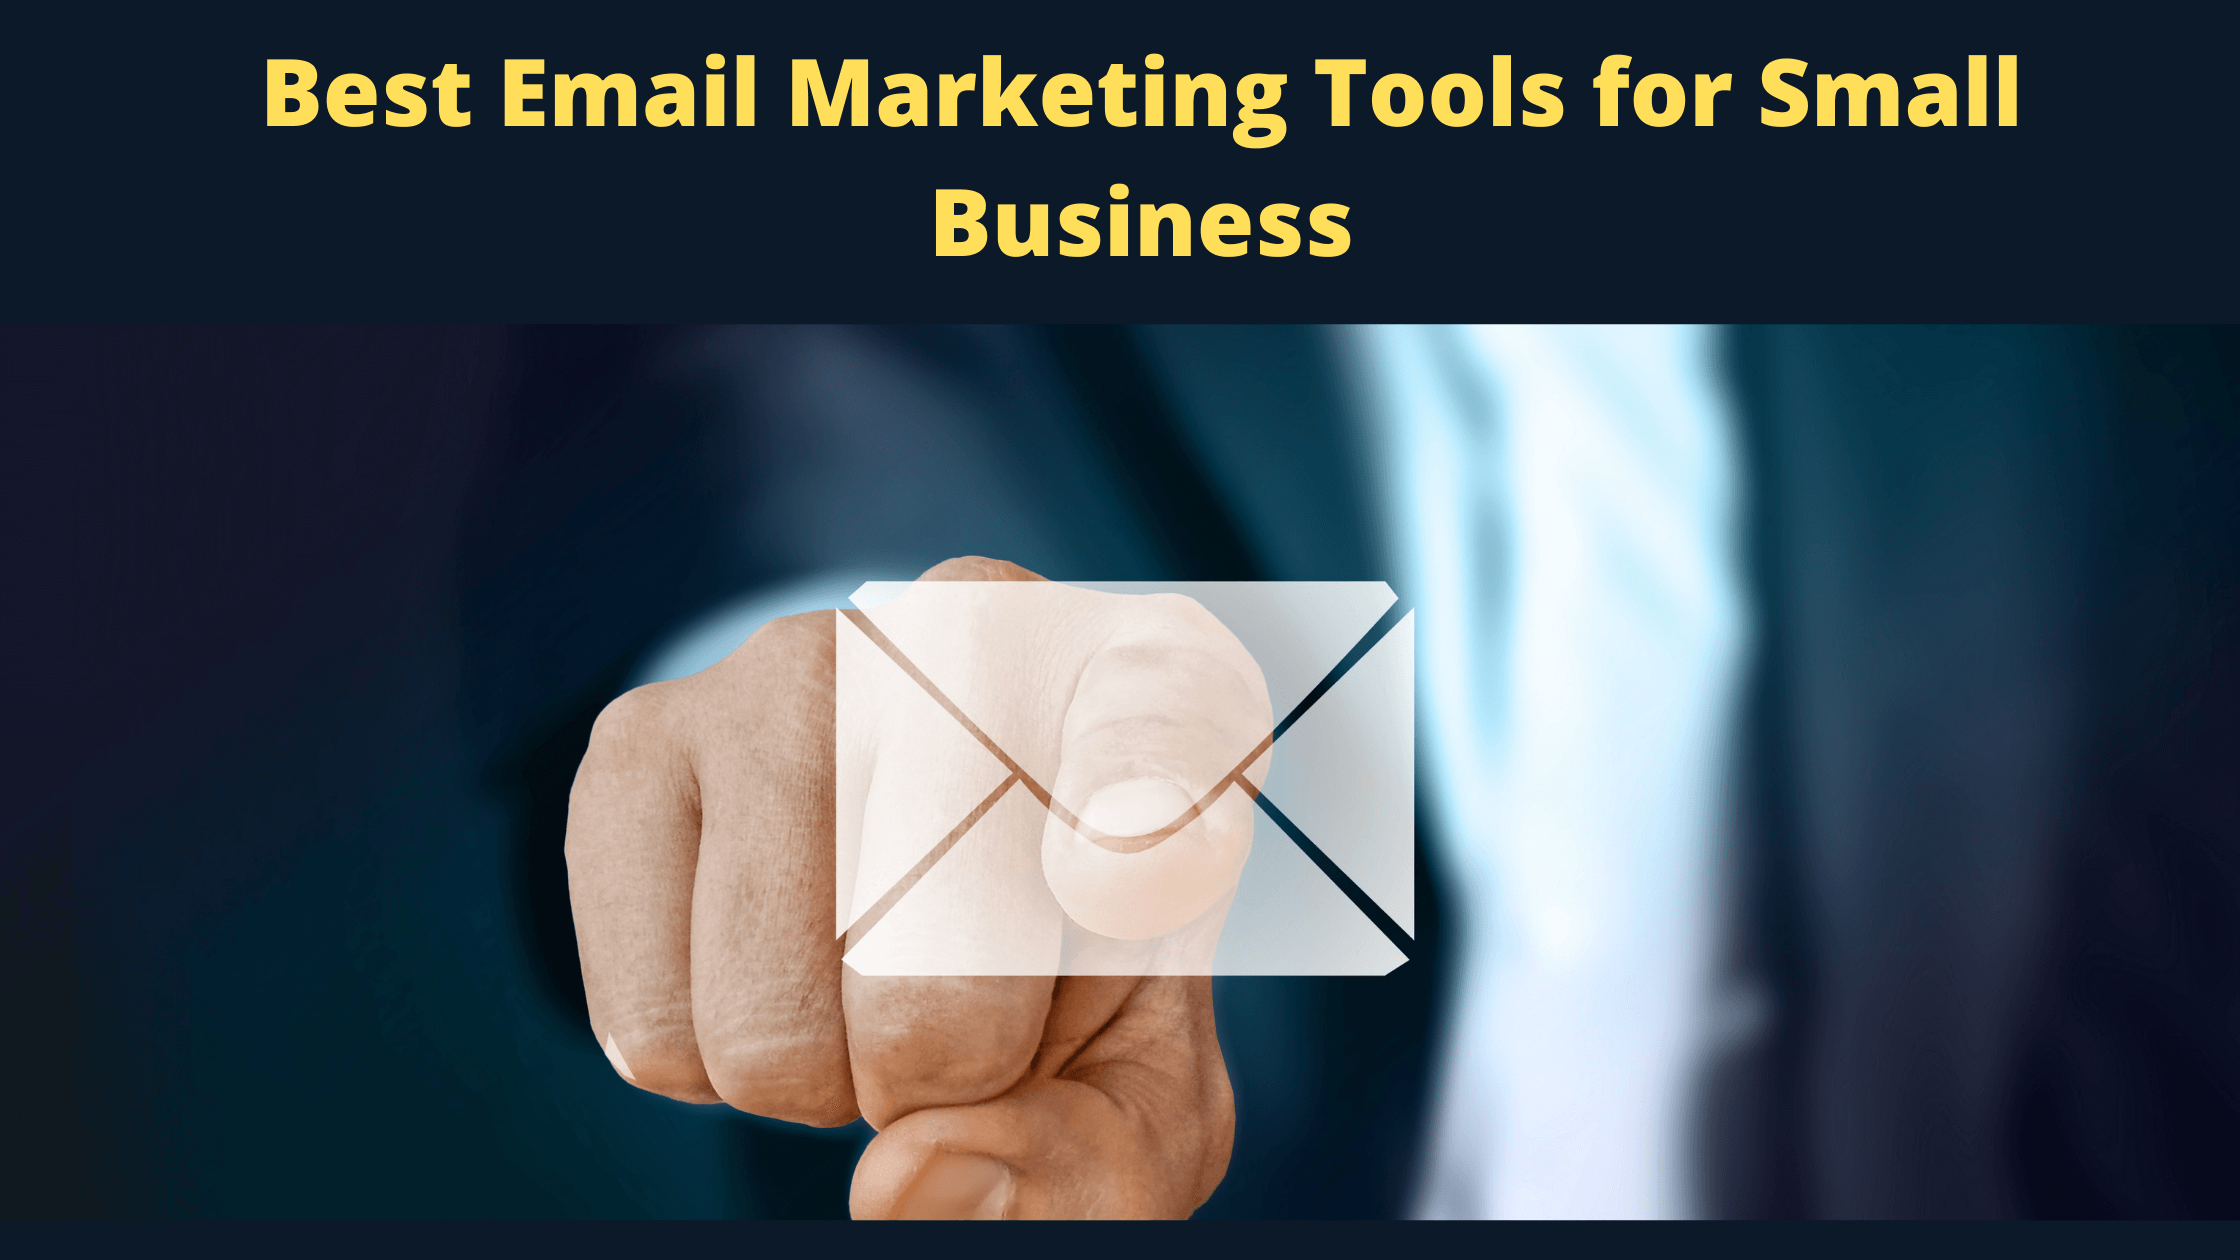 Email Marketing Tools for Small Business